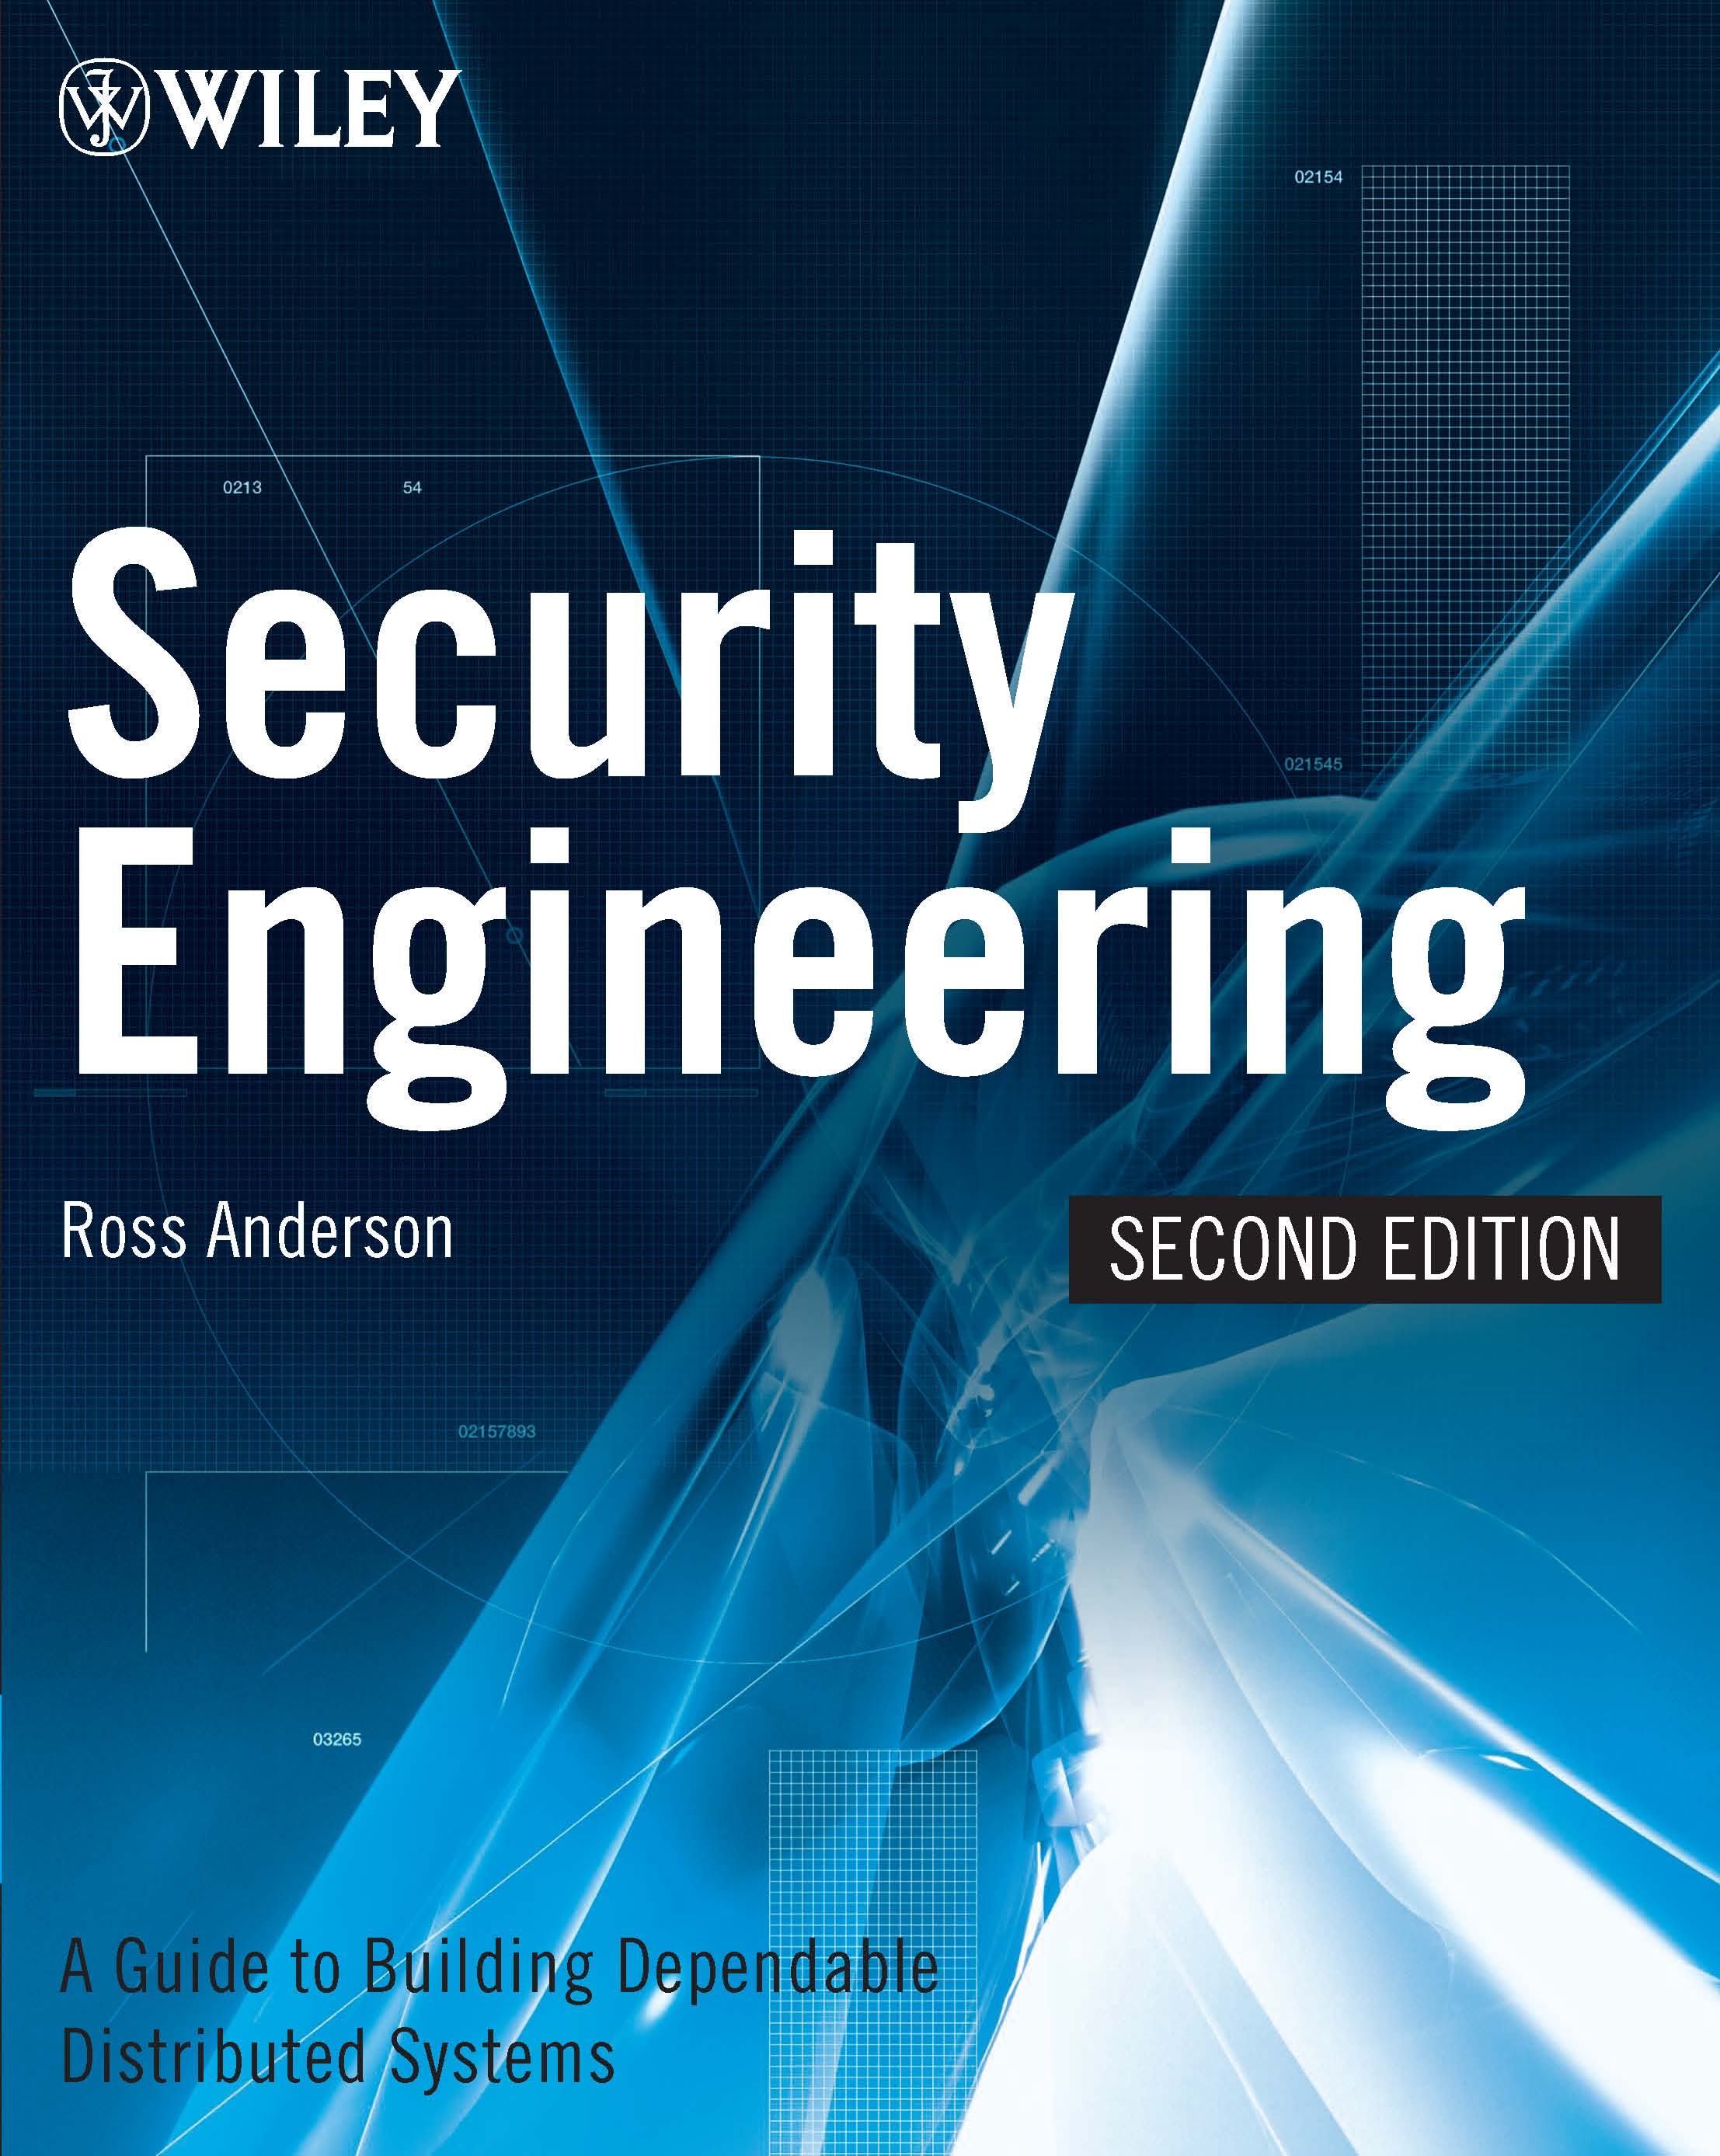 Cover "Security Engineering", 2nd ed., by Ross Andersson